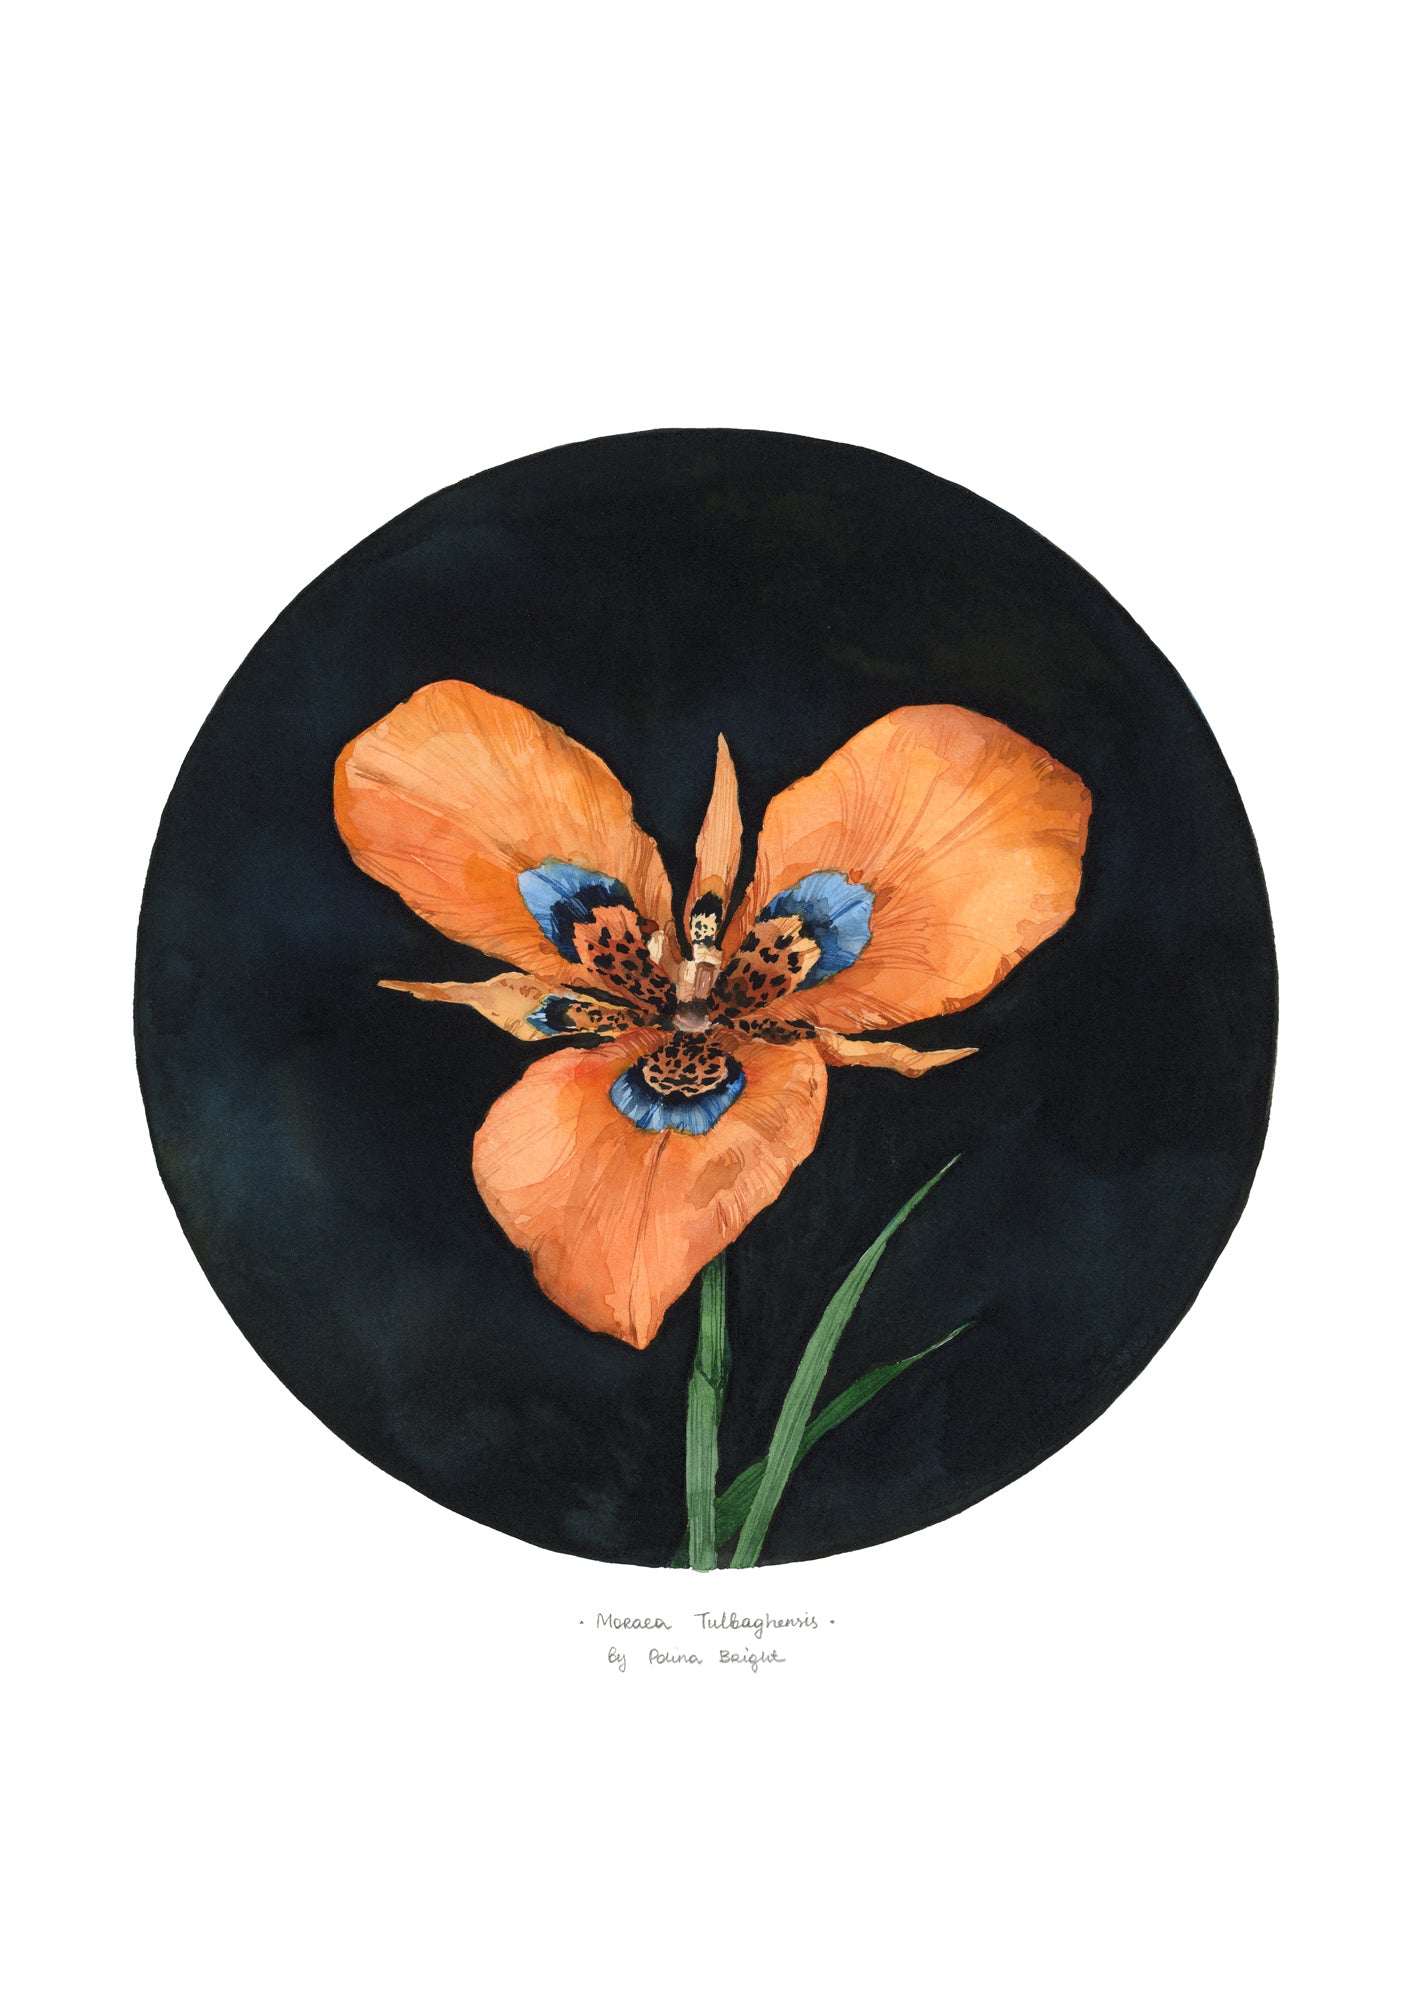 Moraea tulbaghensis by Polina Bright